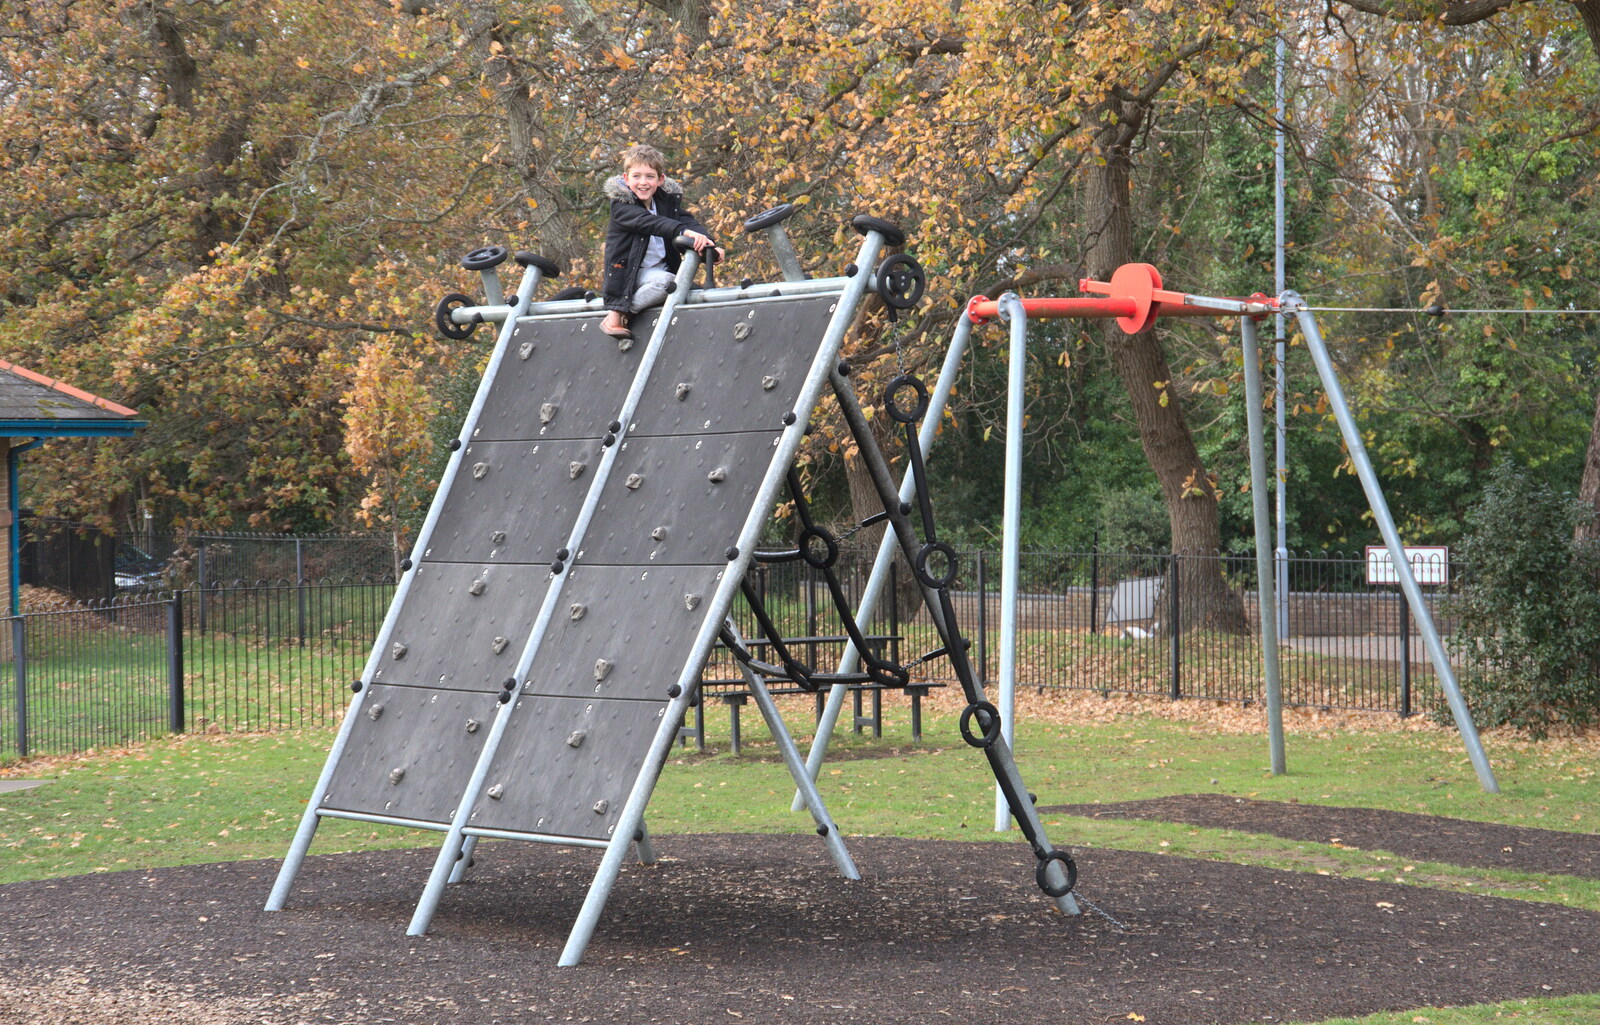 Fred up a climbing frame in Highcliffe Rec from Thanksgiving in Highcliffe, Dorset - 23rd November 2018